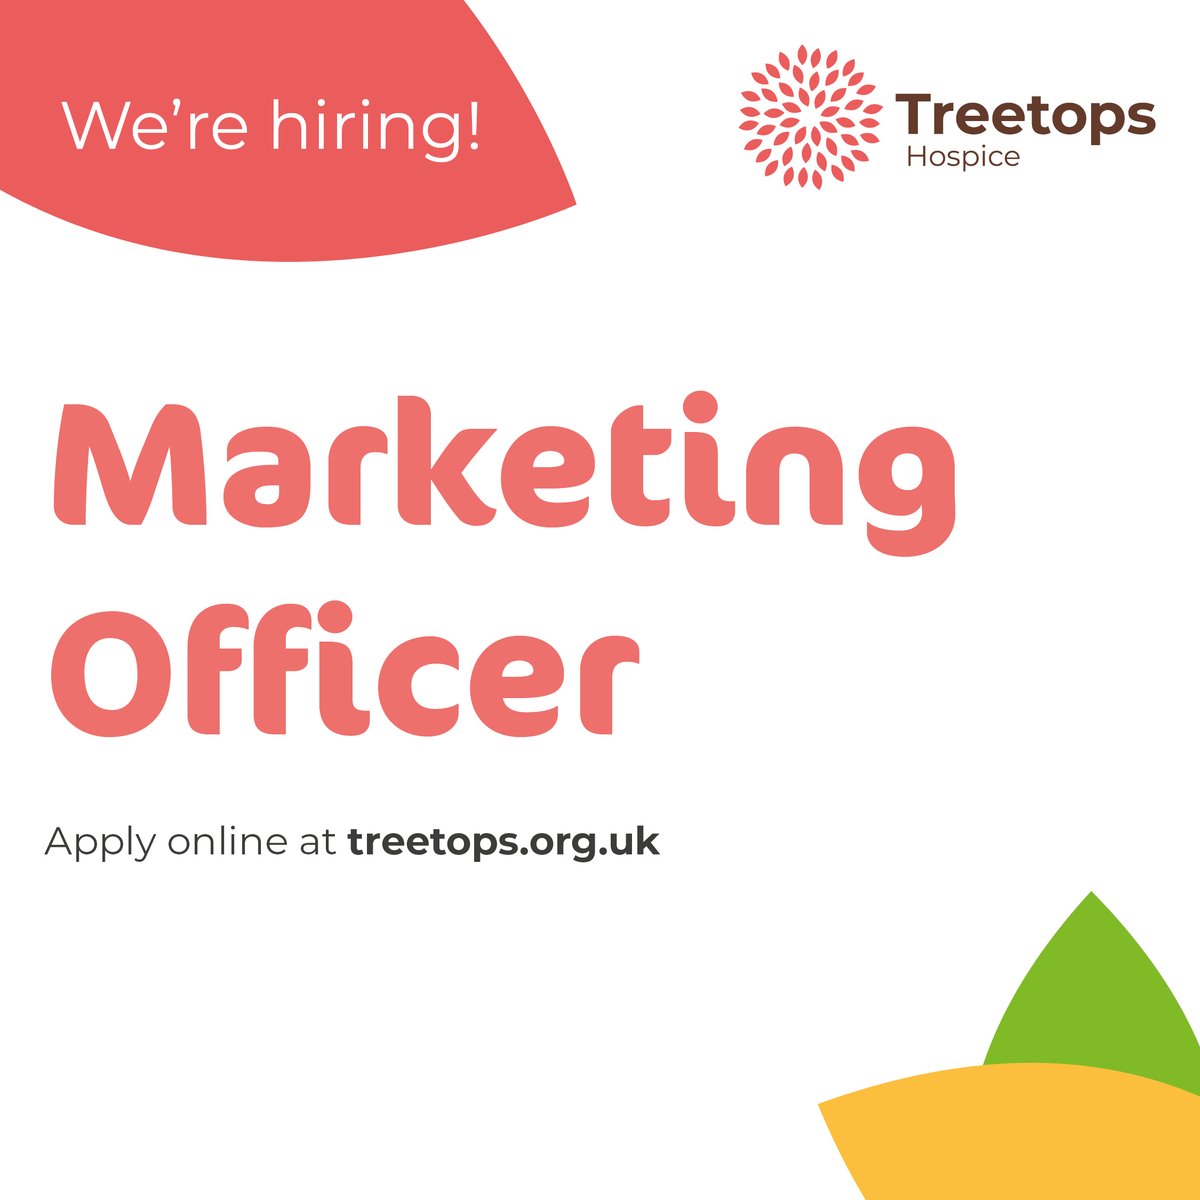 Join our Team! We are recruiting a Marketing Officer to join our fast-paced, hardworking marketing team. Find out more here: bit.ly/3vTBg5u